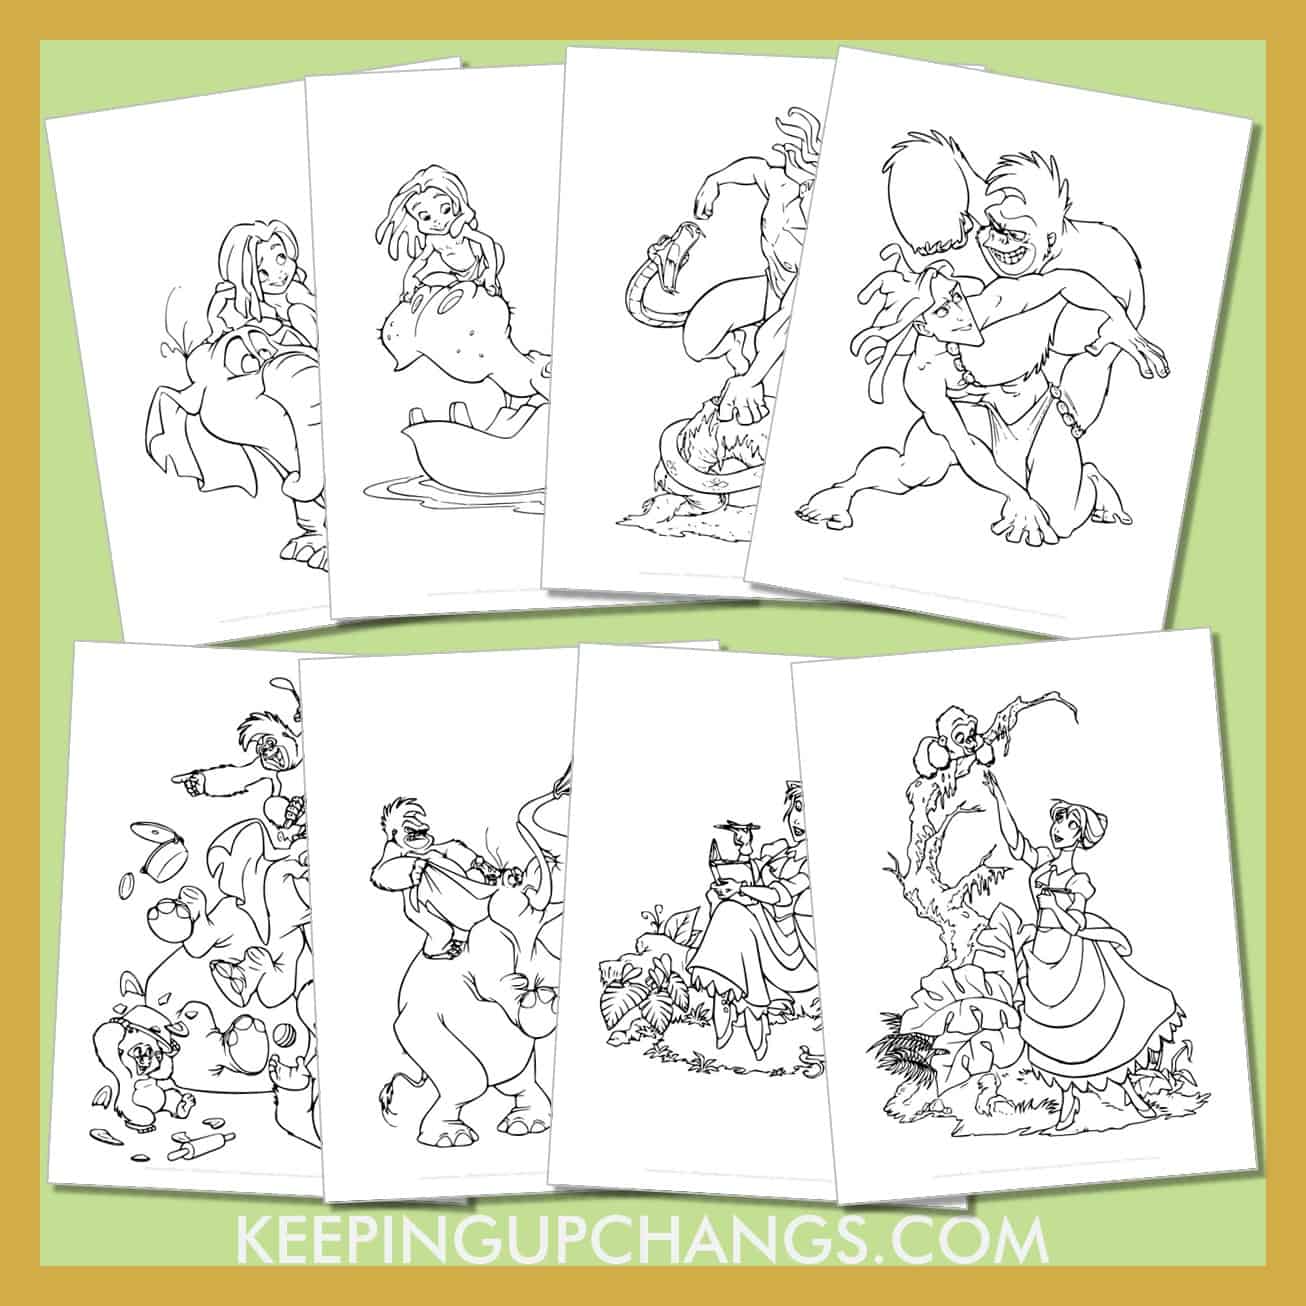 free tarzan pictures to color for toddlers, kids, adults.